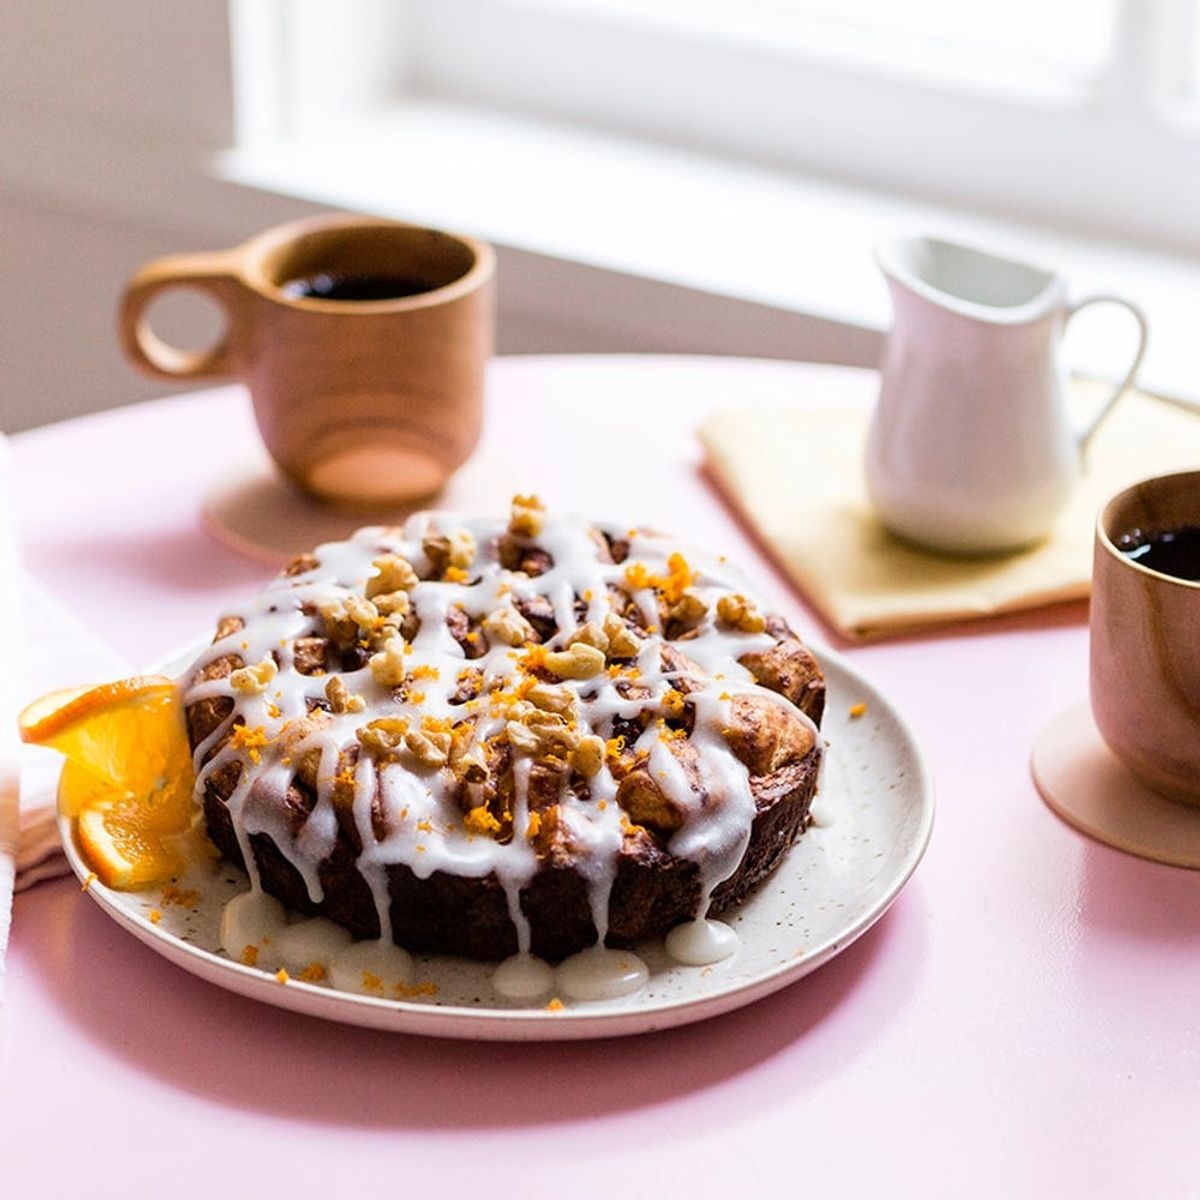 Slow-Cook Your Way to a Decadent Vegan Cinnamon Roll Casserole